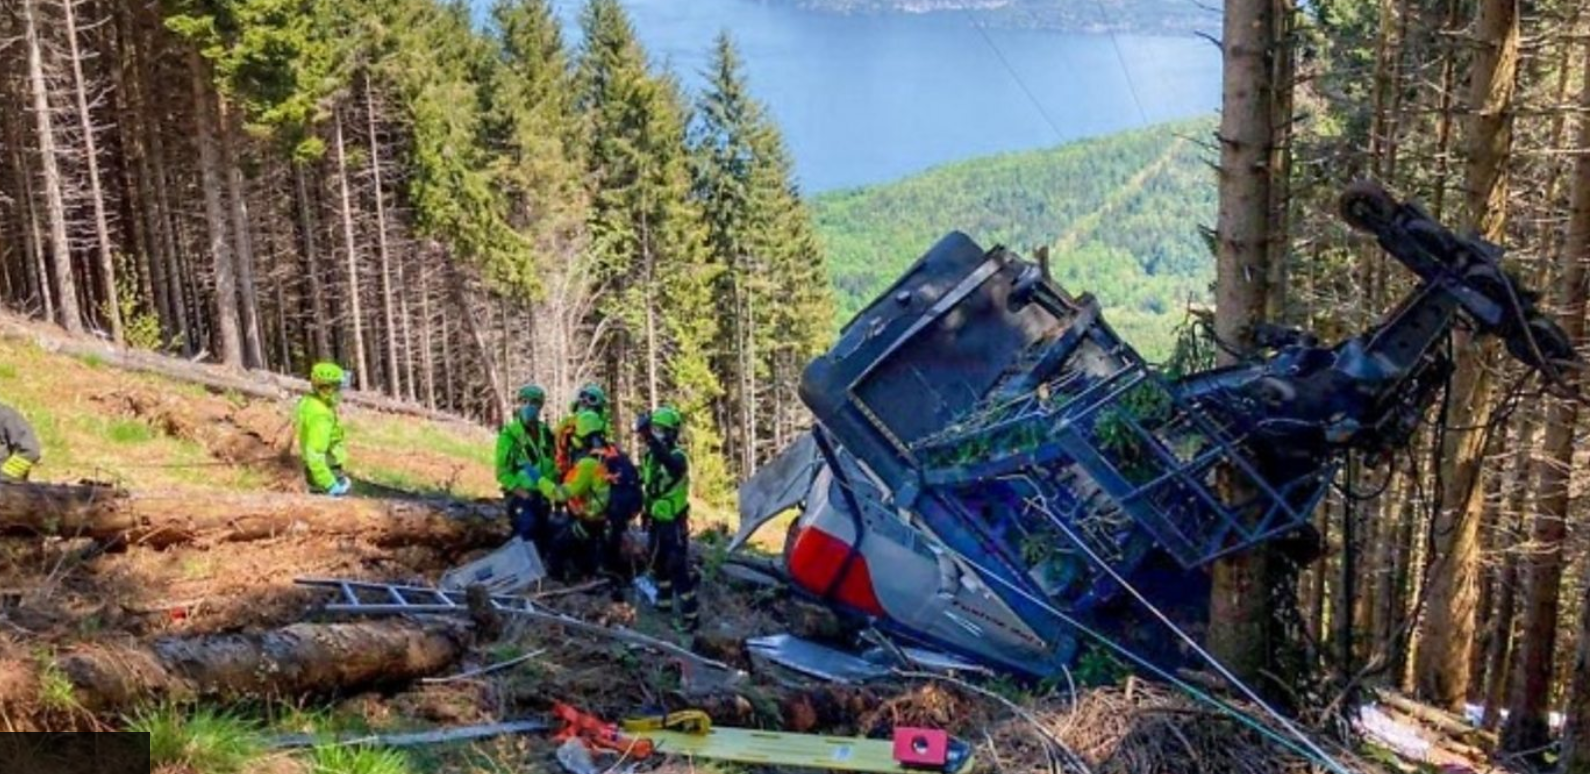 Cable car accident in Northern Italy